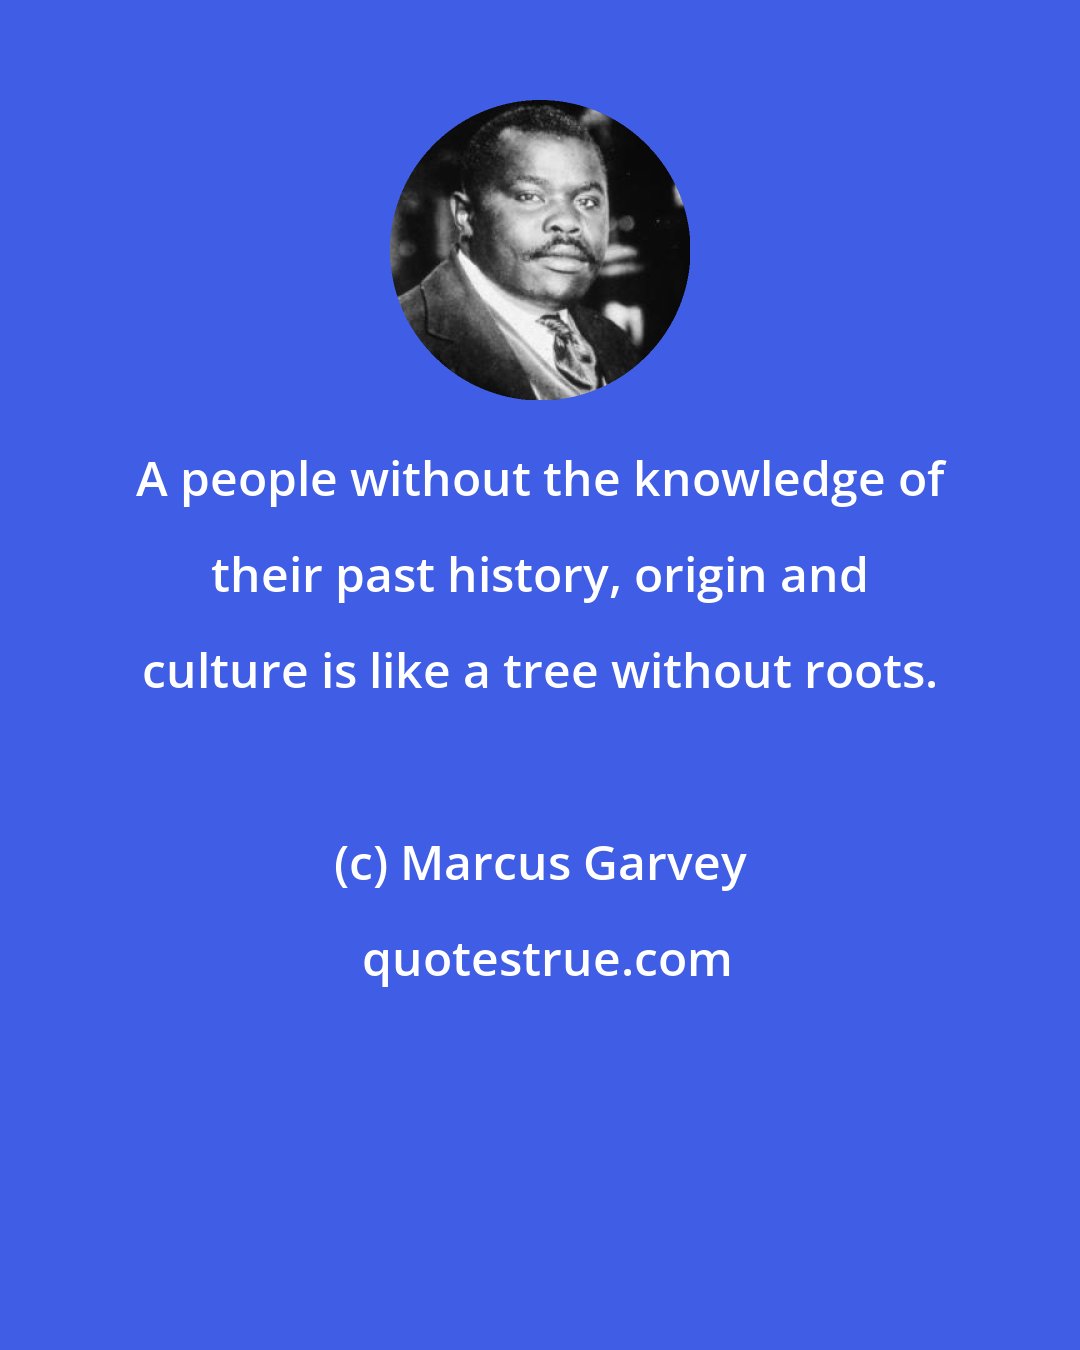 Marcus Garvey: A people without the knowledge of their past history, origin and culture is like a tree without roots.